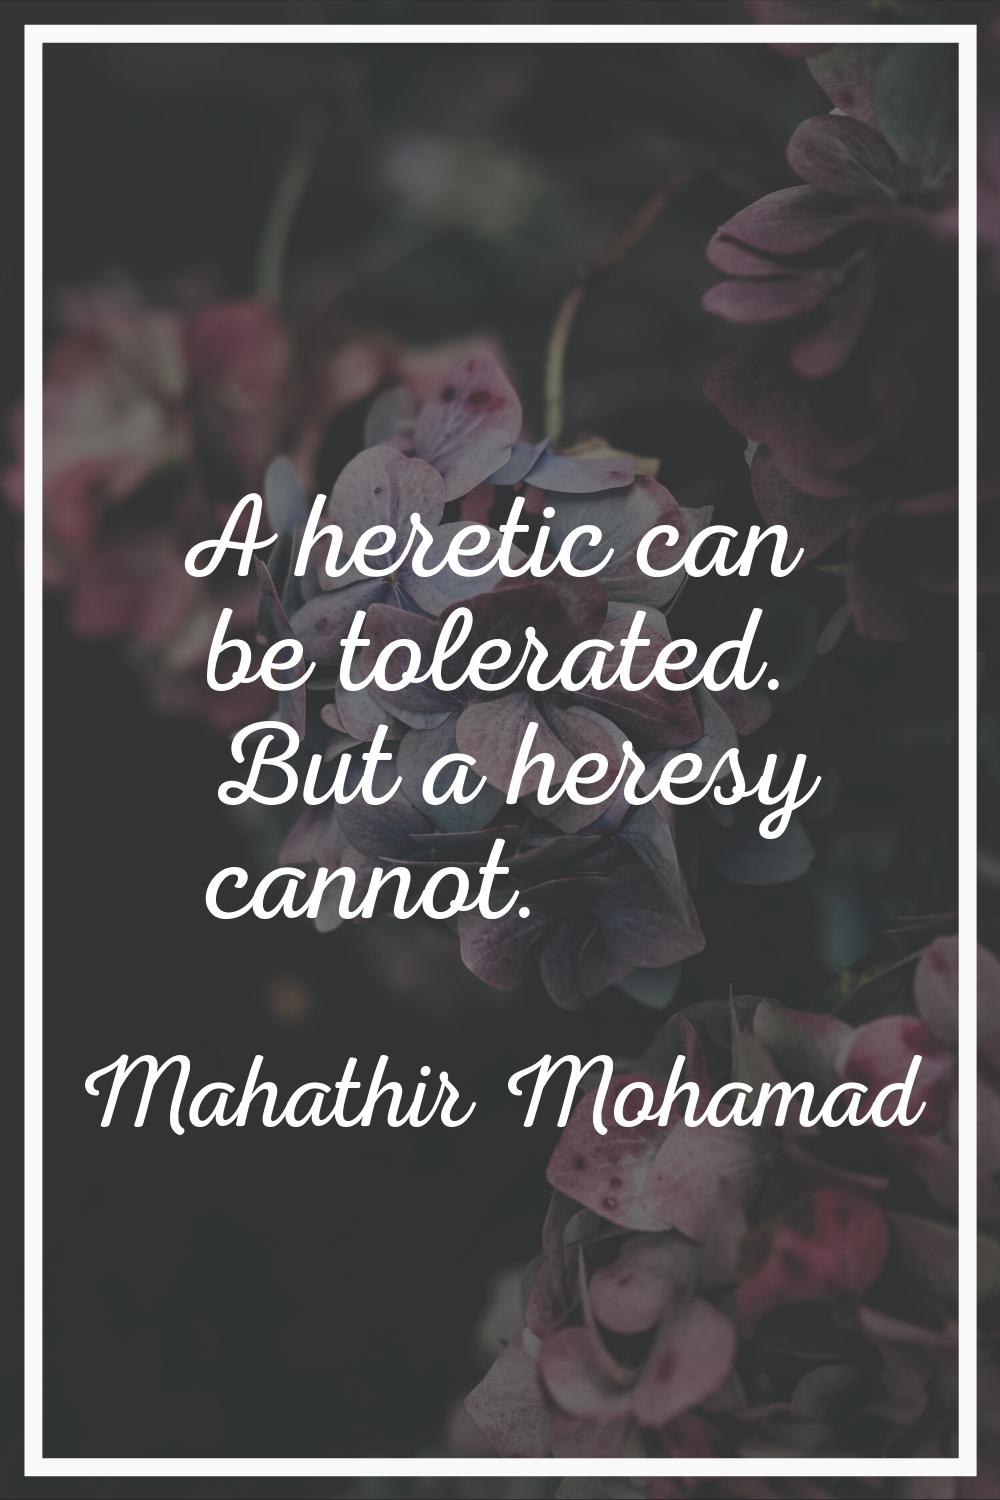 A heretic can be tolerated. But a heresy cannot.